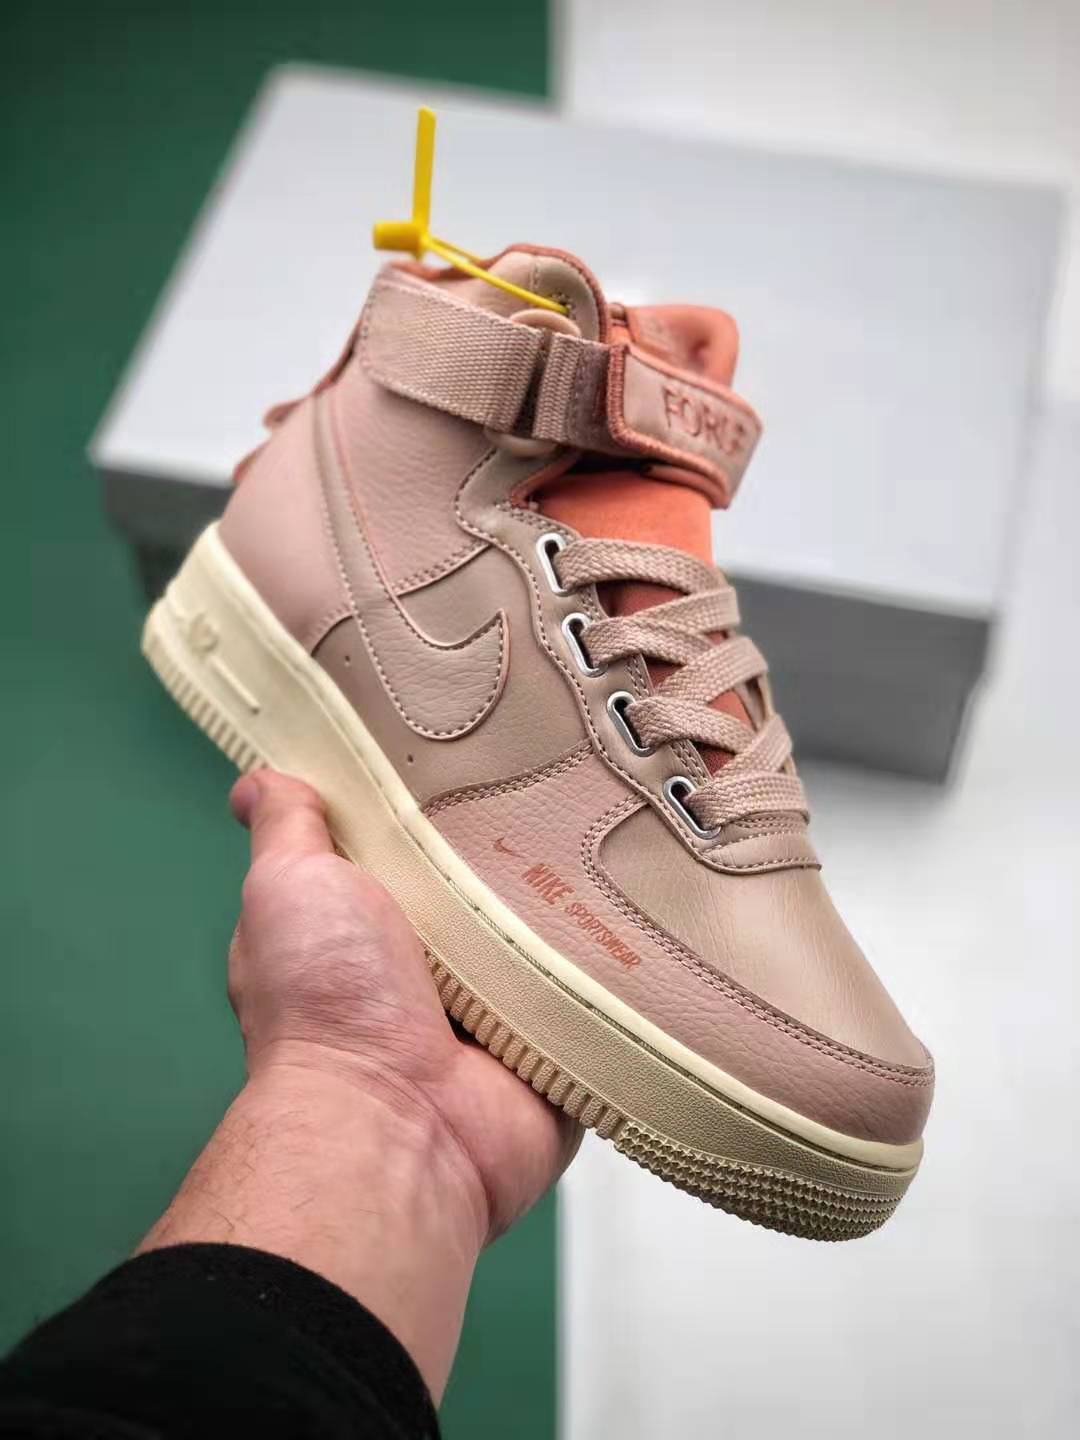 Nike Air Force 1 High Utility Particle Beige AJ7311-200 - Trendy and Stylish Sneakers | Limited Stock